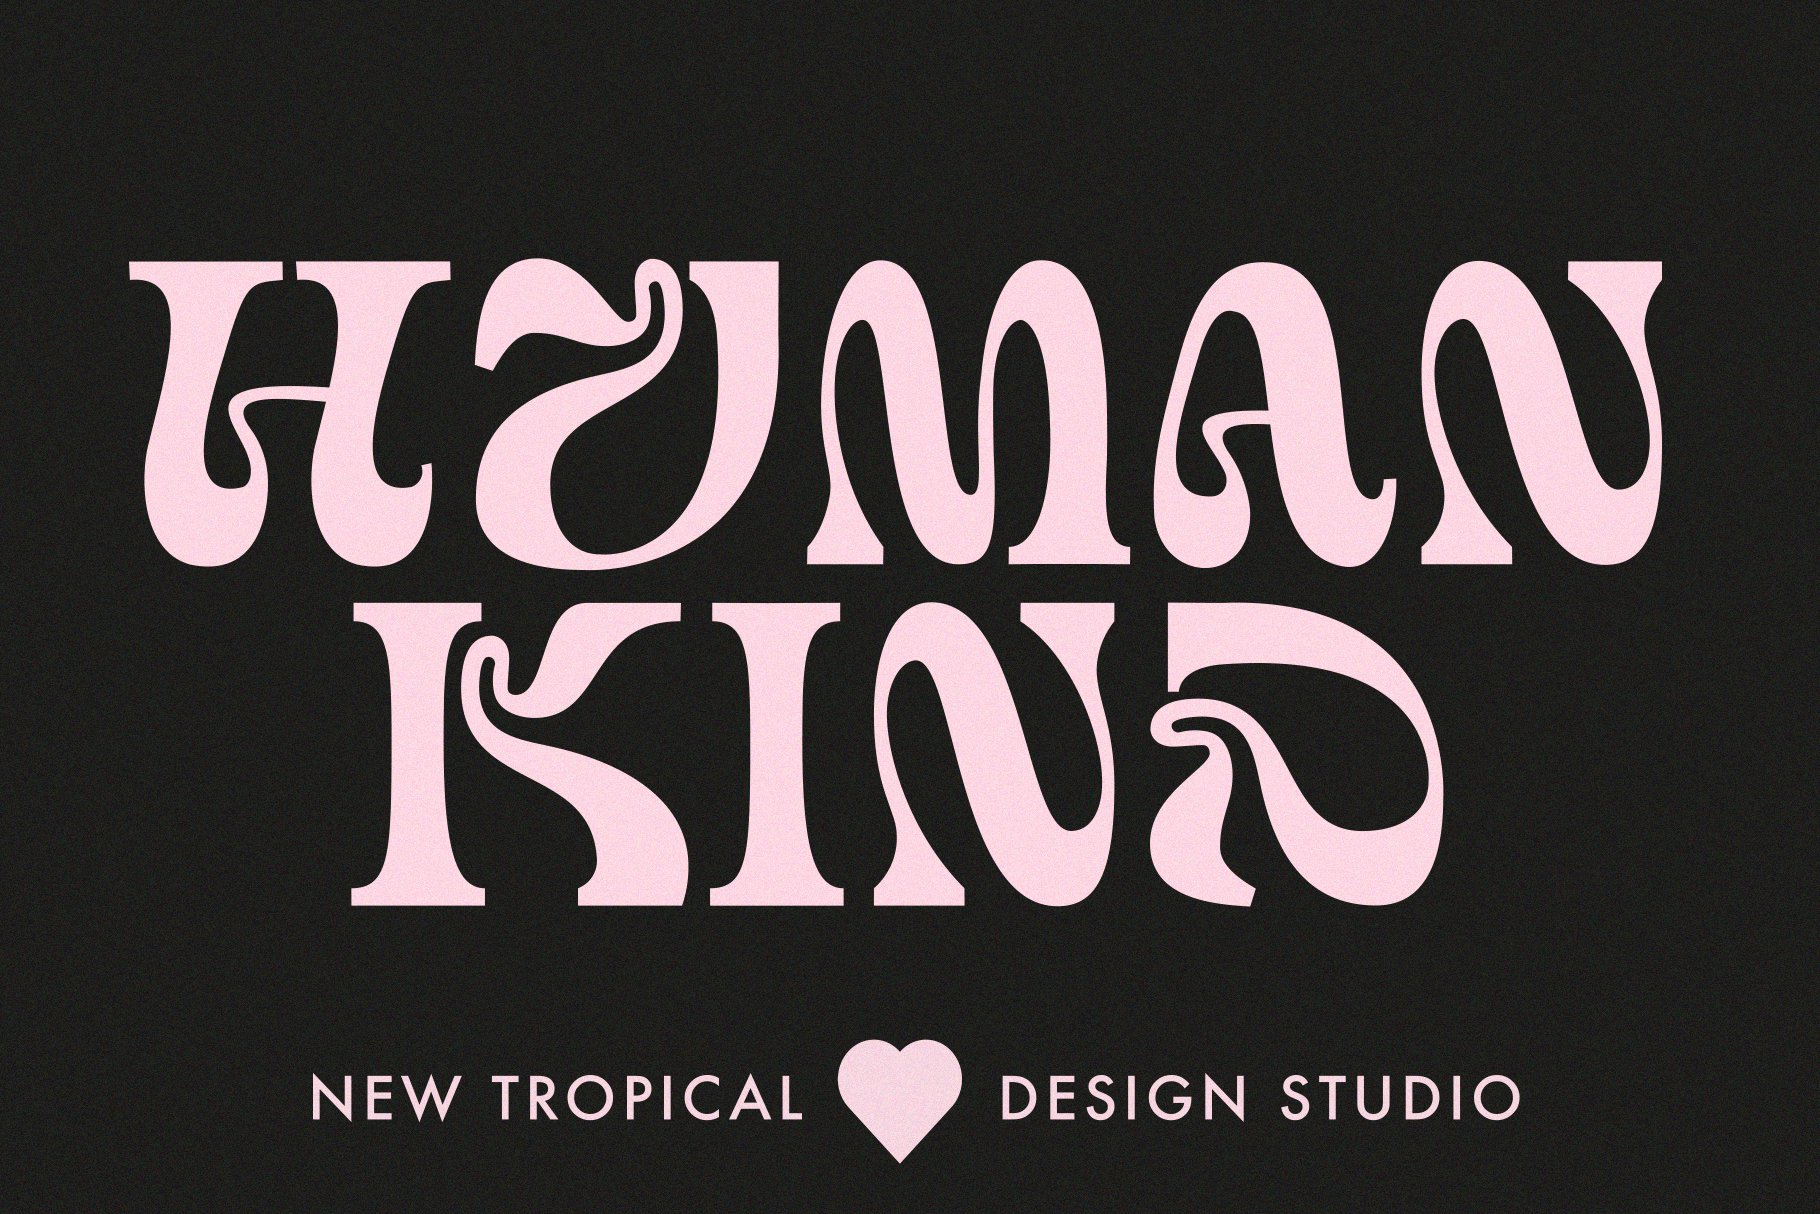 Humankind -Experimental DisplayFont cover image.